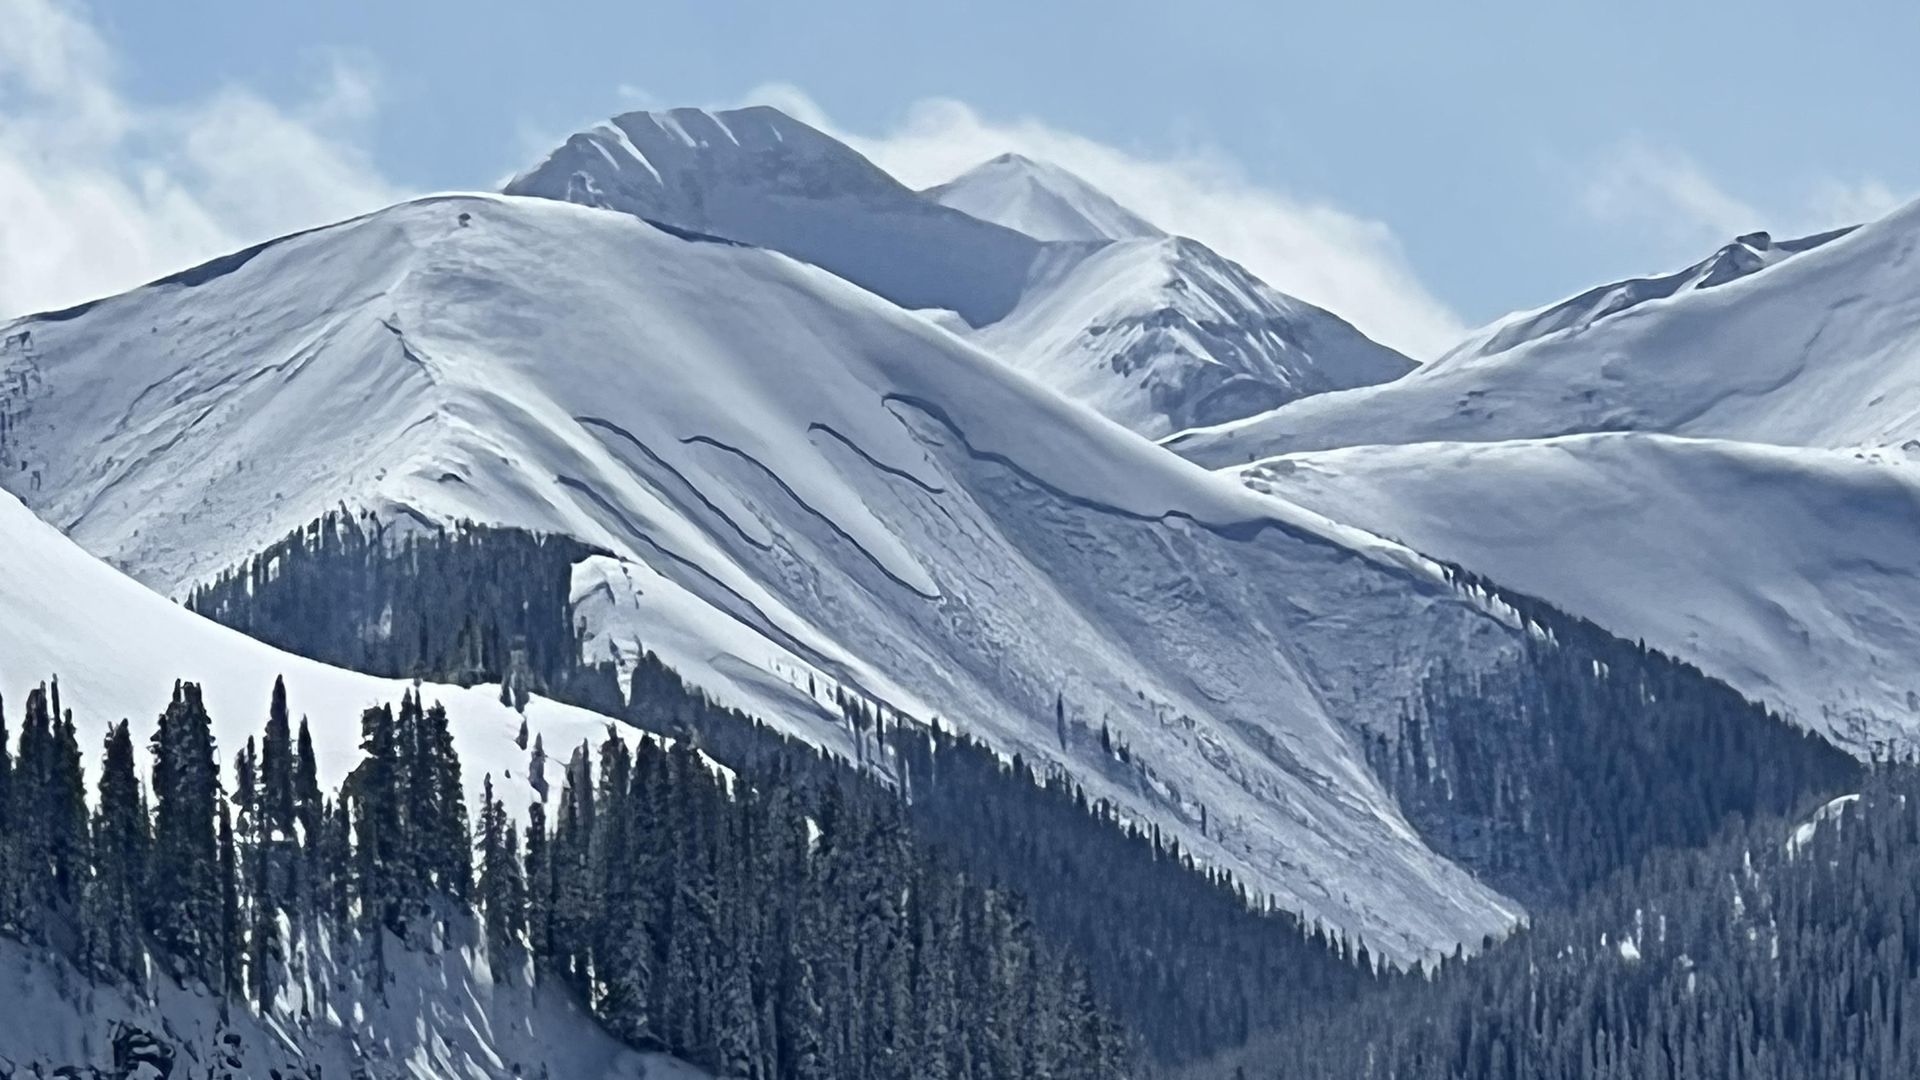 A natural avalanche Feb. 23 in the San Juan mountains. Photo courtesy of Byran Jarrett and CAIC.